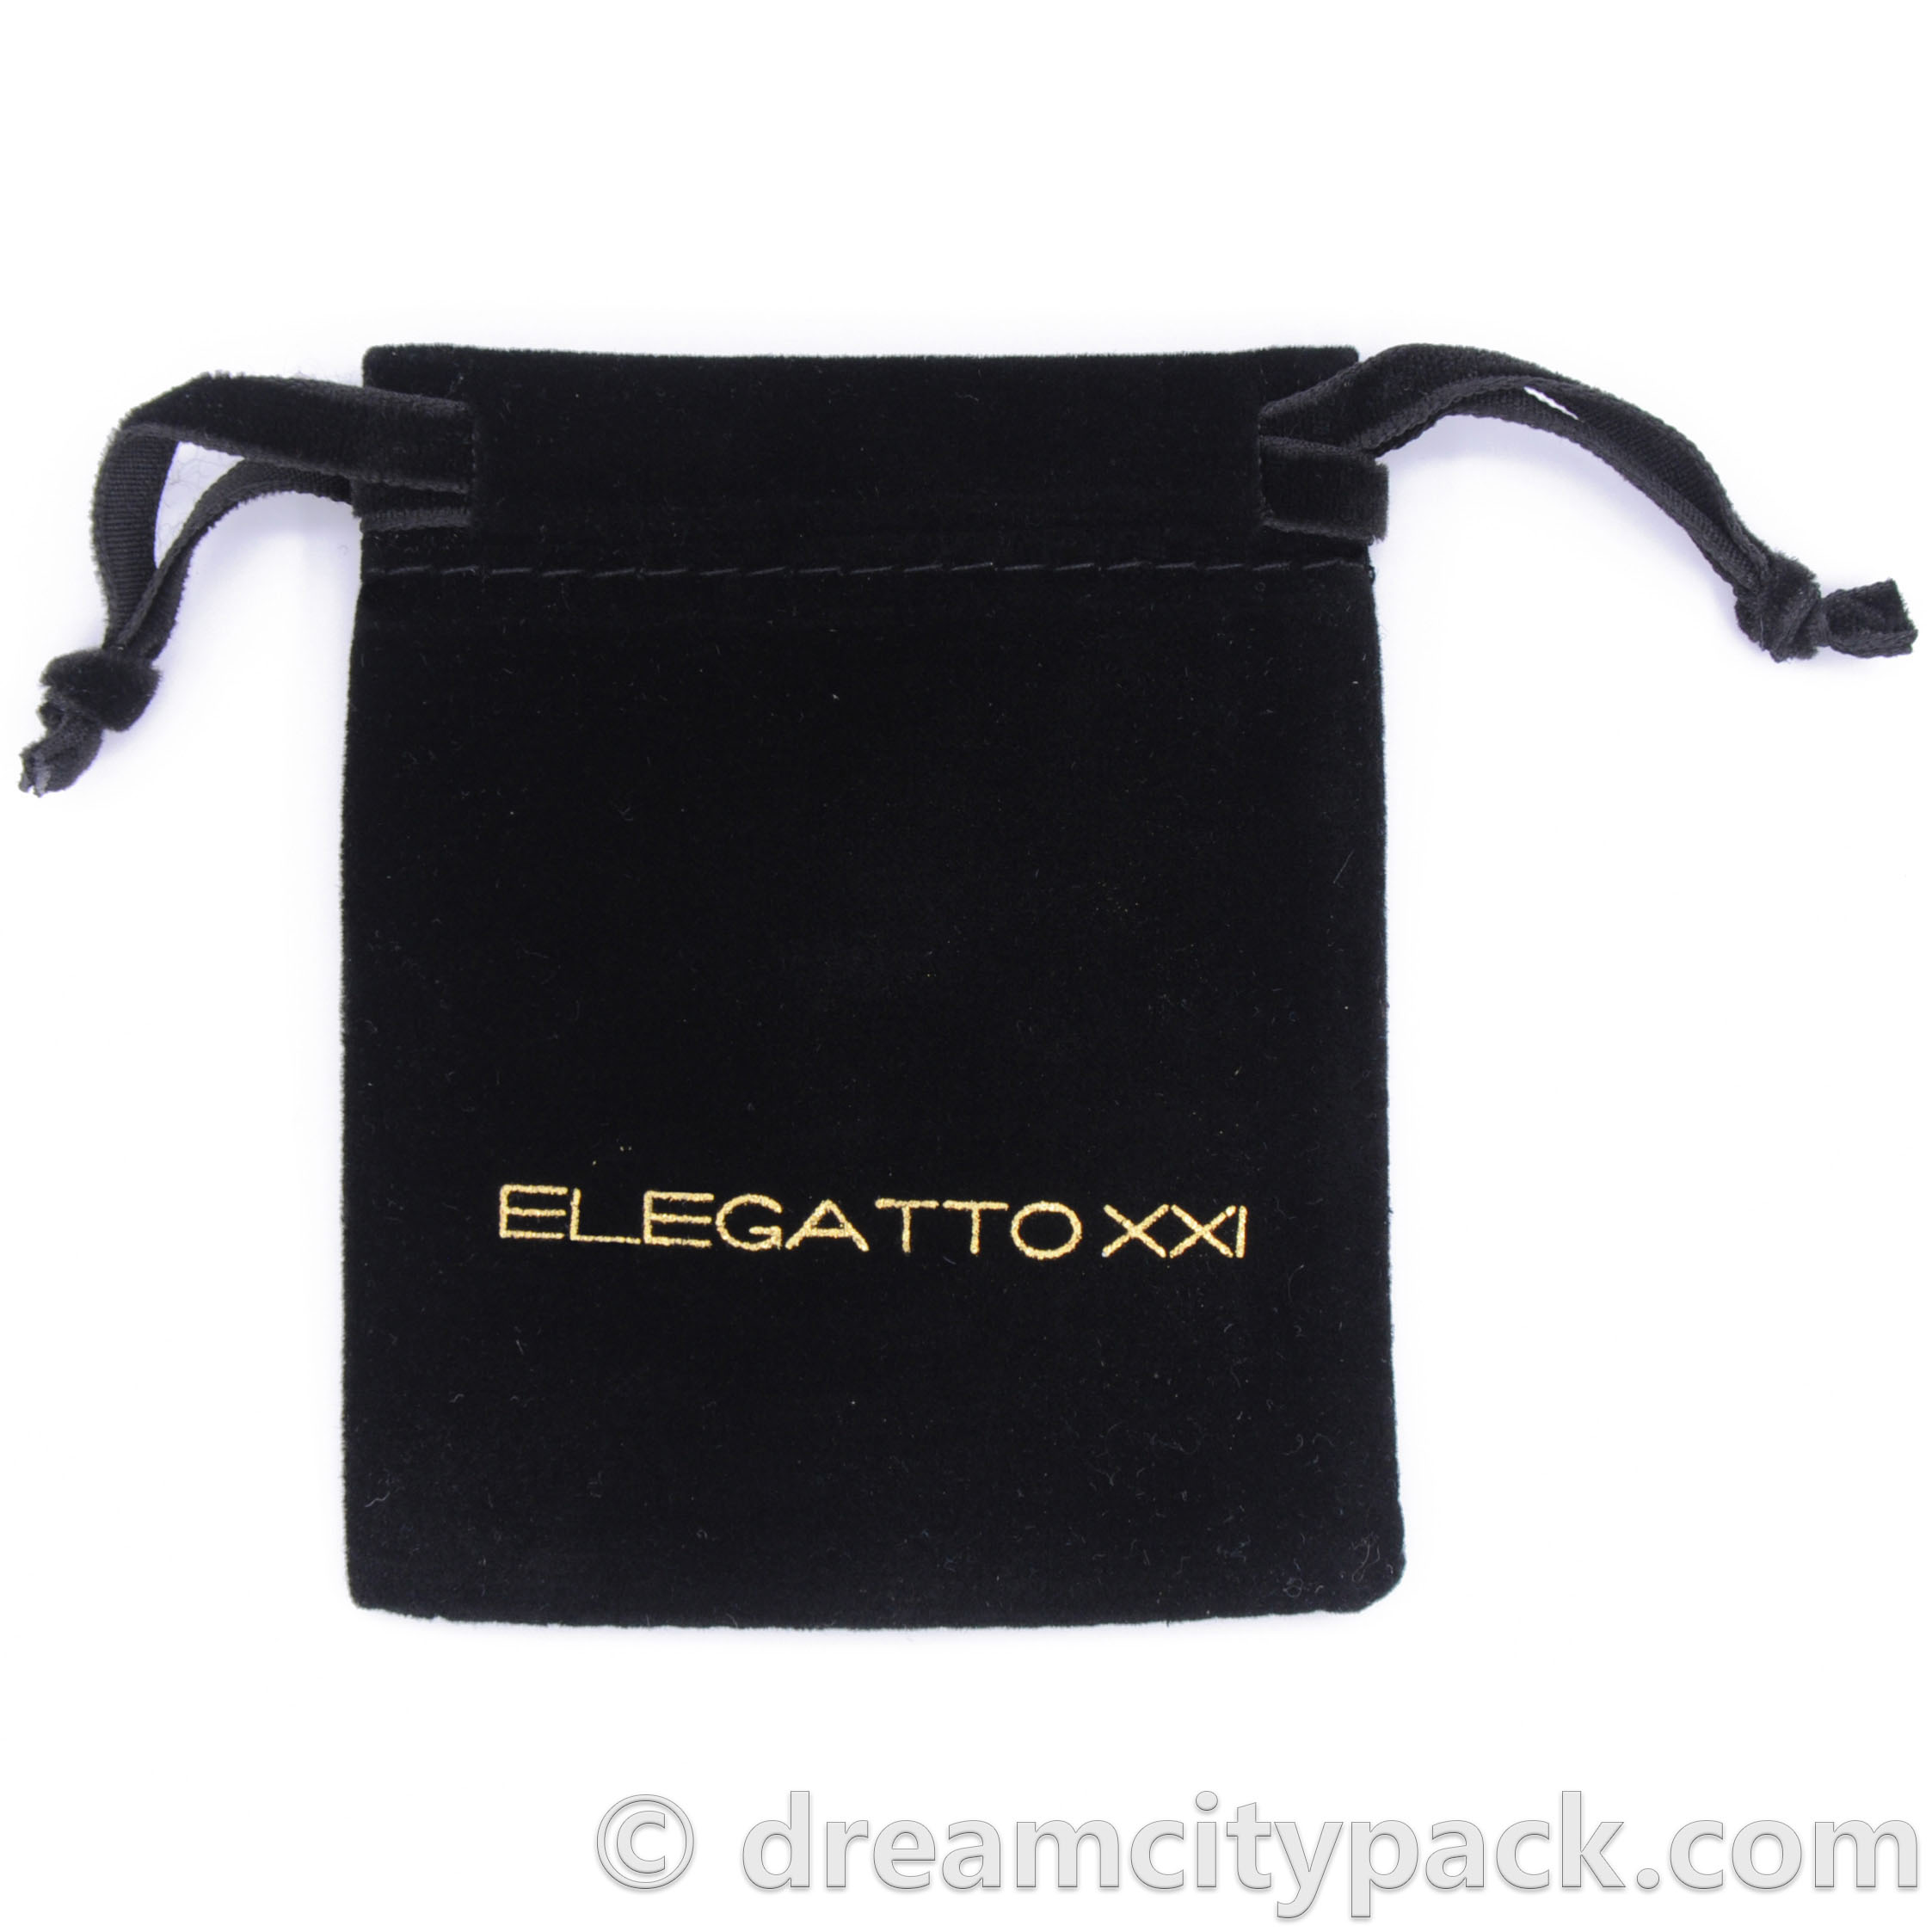 Black Canvas Cosmetic Bag With Gold Foil Logo & Zippered Closure